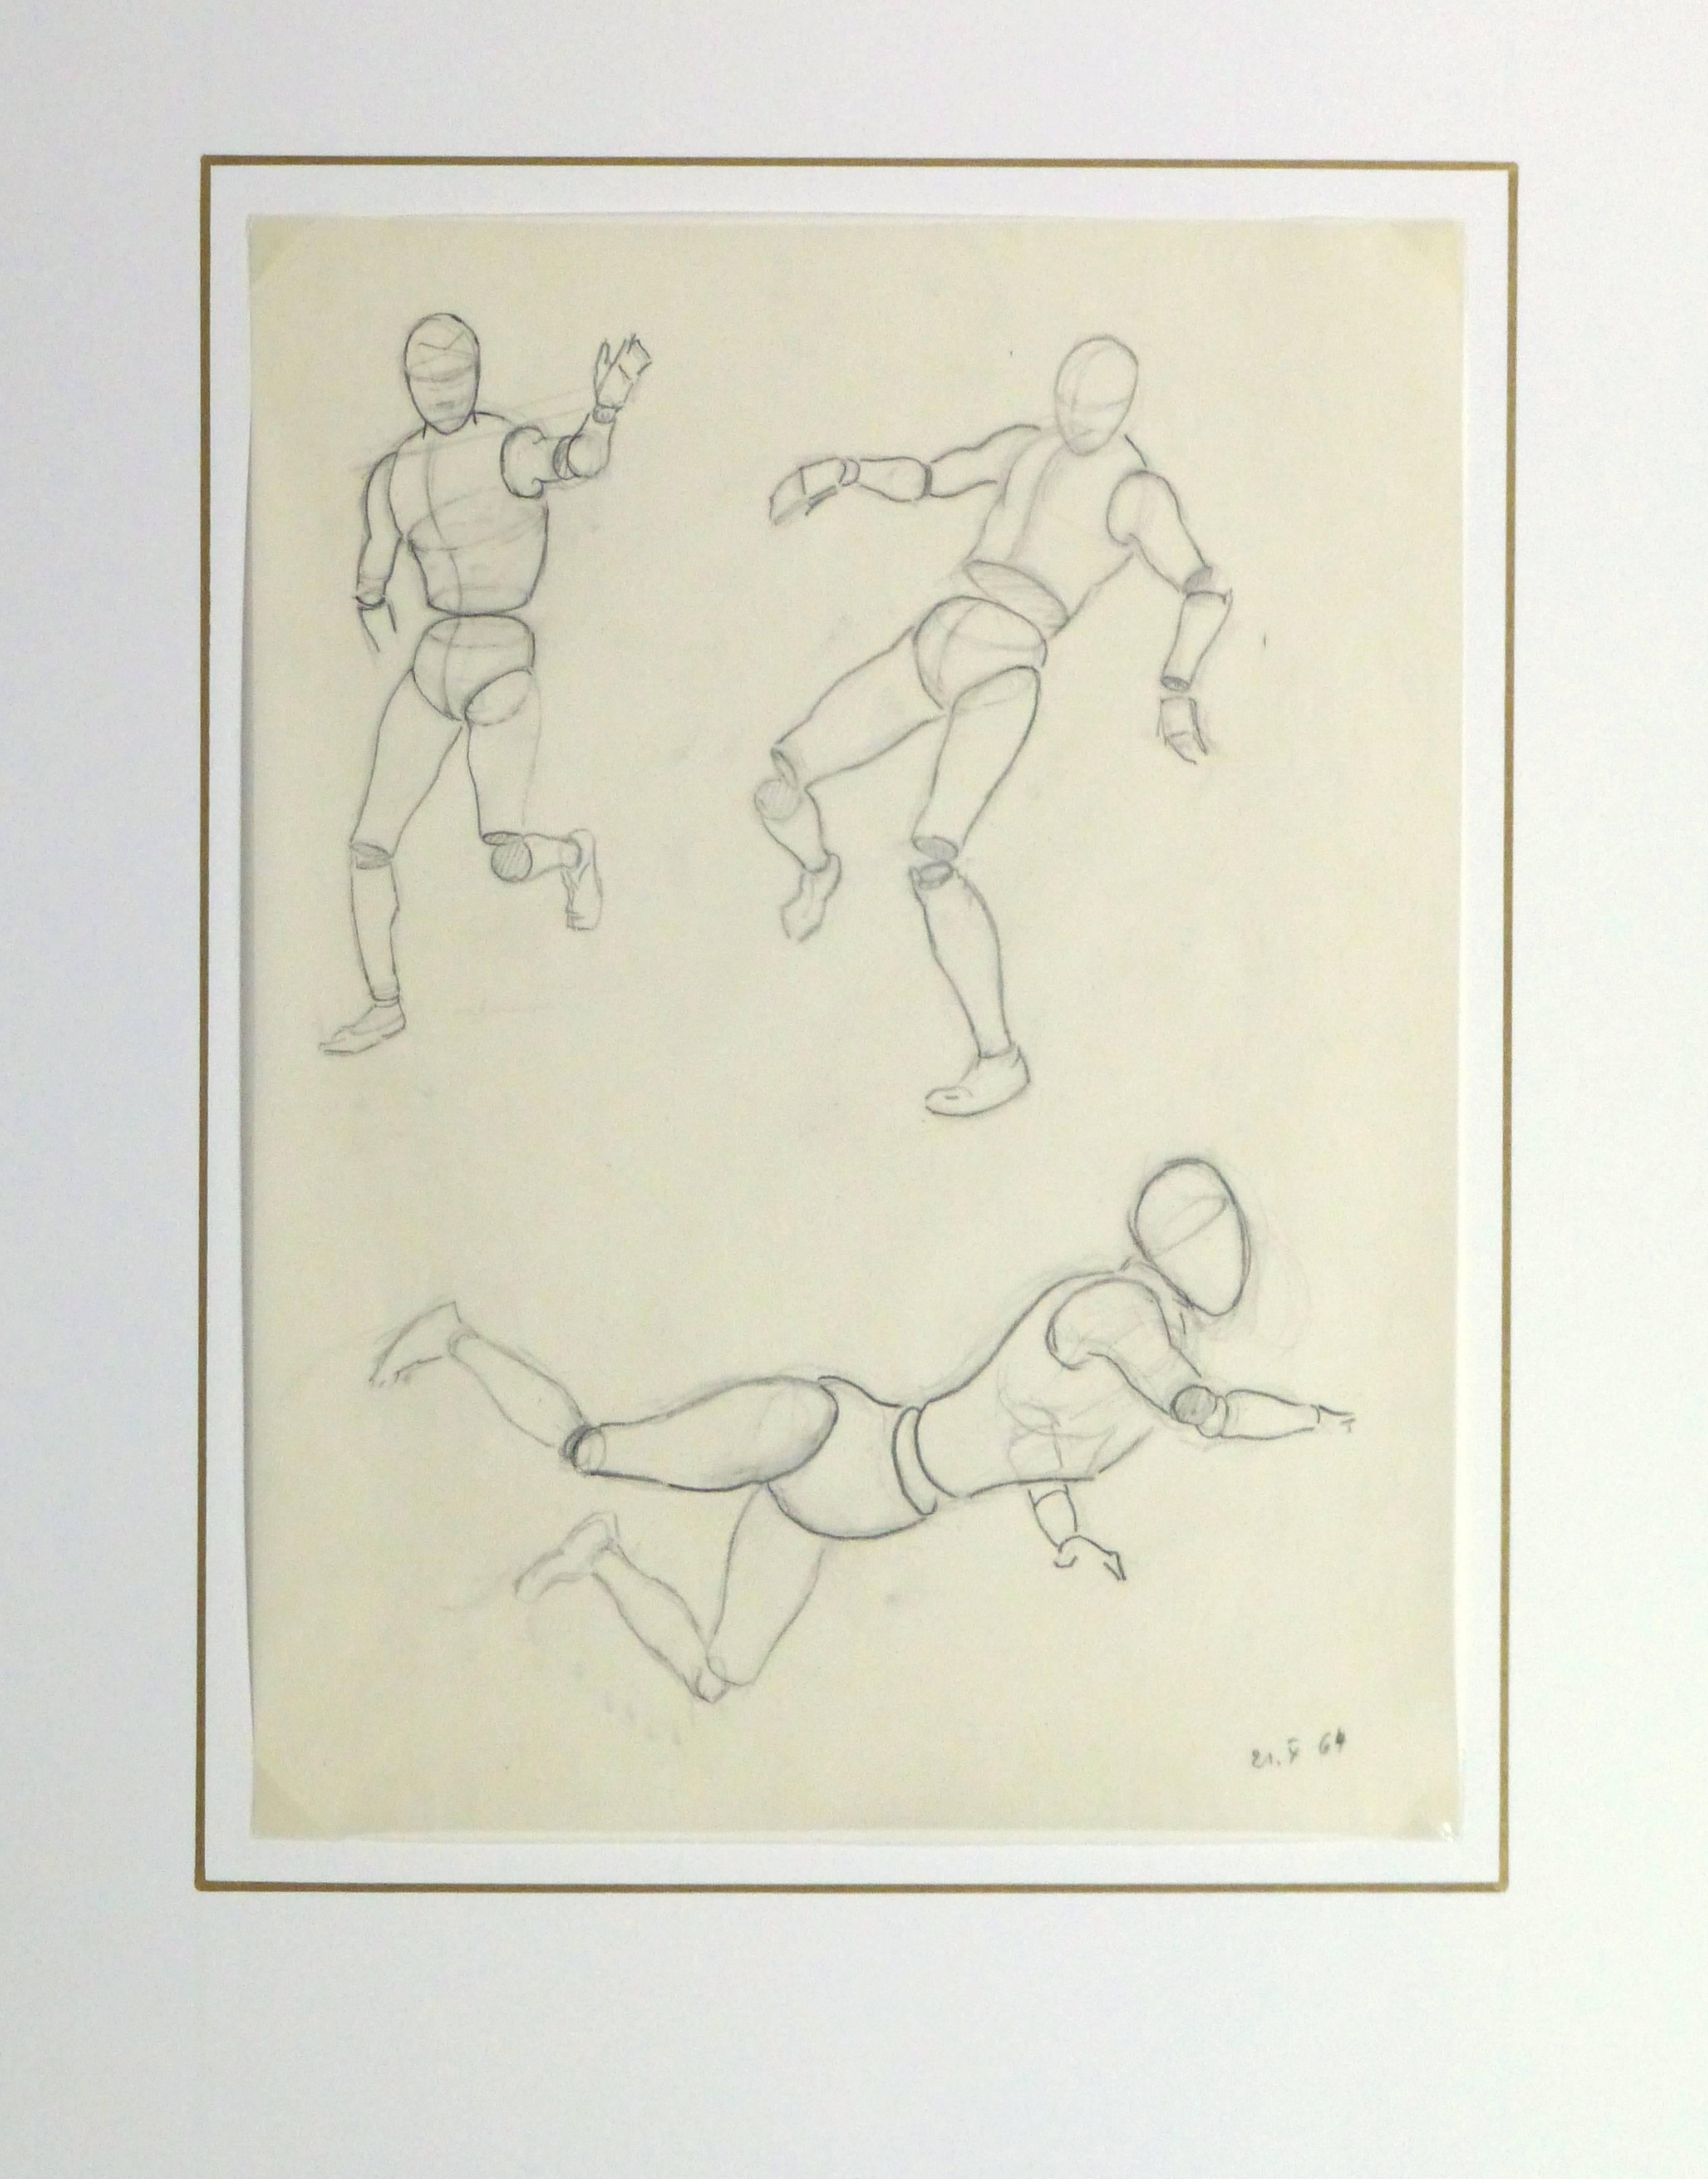 Lively pencil sketch on transfer paper of figure in various degrees of motion by artist Werner Bell, 1964. Dated lower right.

Original artwork on paper displayed on a white mat with a gold border. Archival plastic sleeve and Certificate of